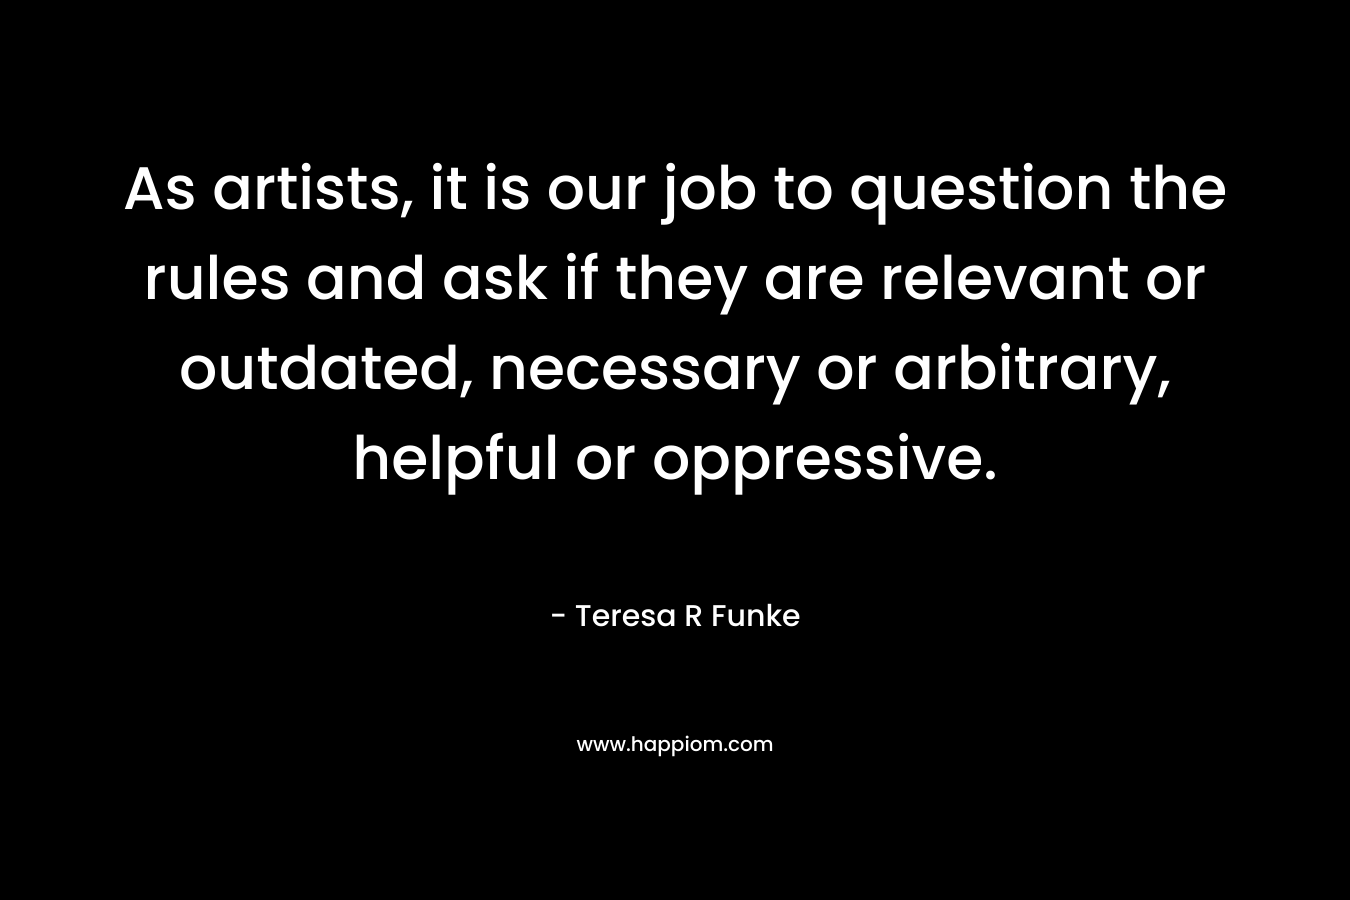 As artists, it is our job to question the rules and ask if they are relevant or outdated, necessary or arbitrary, helpful or oppressive. – Teresa R Funke